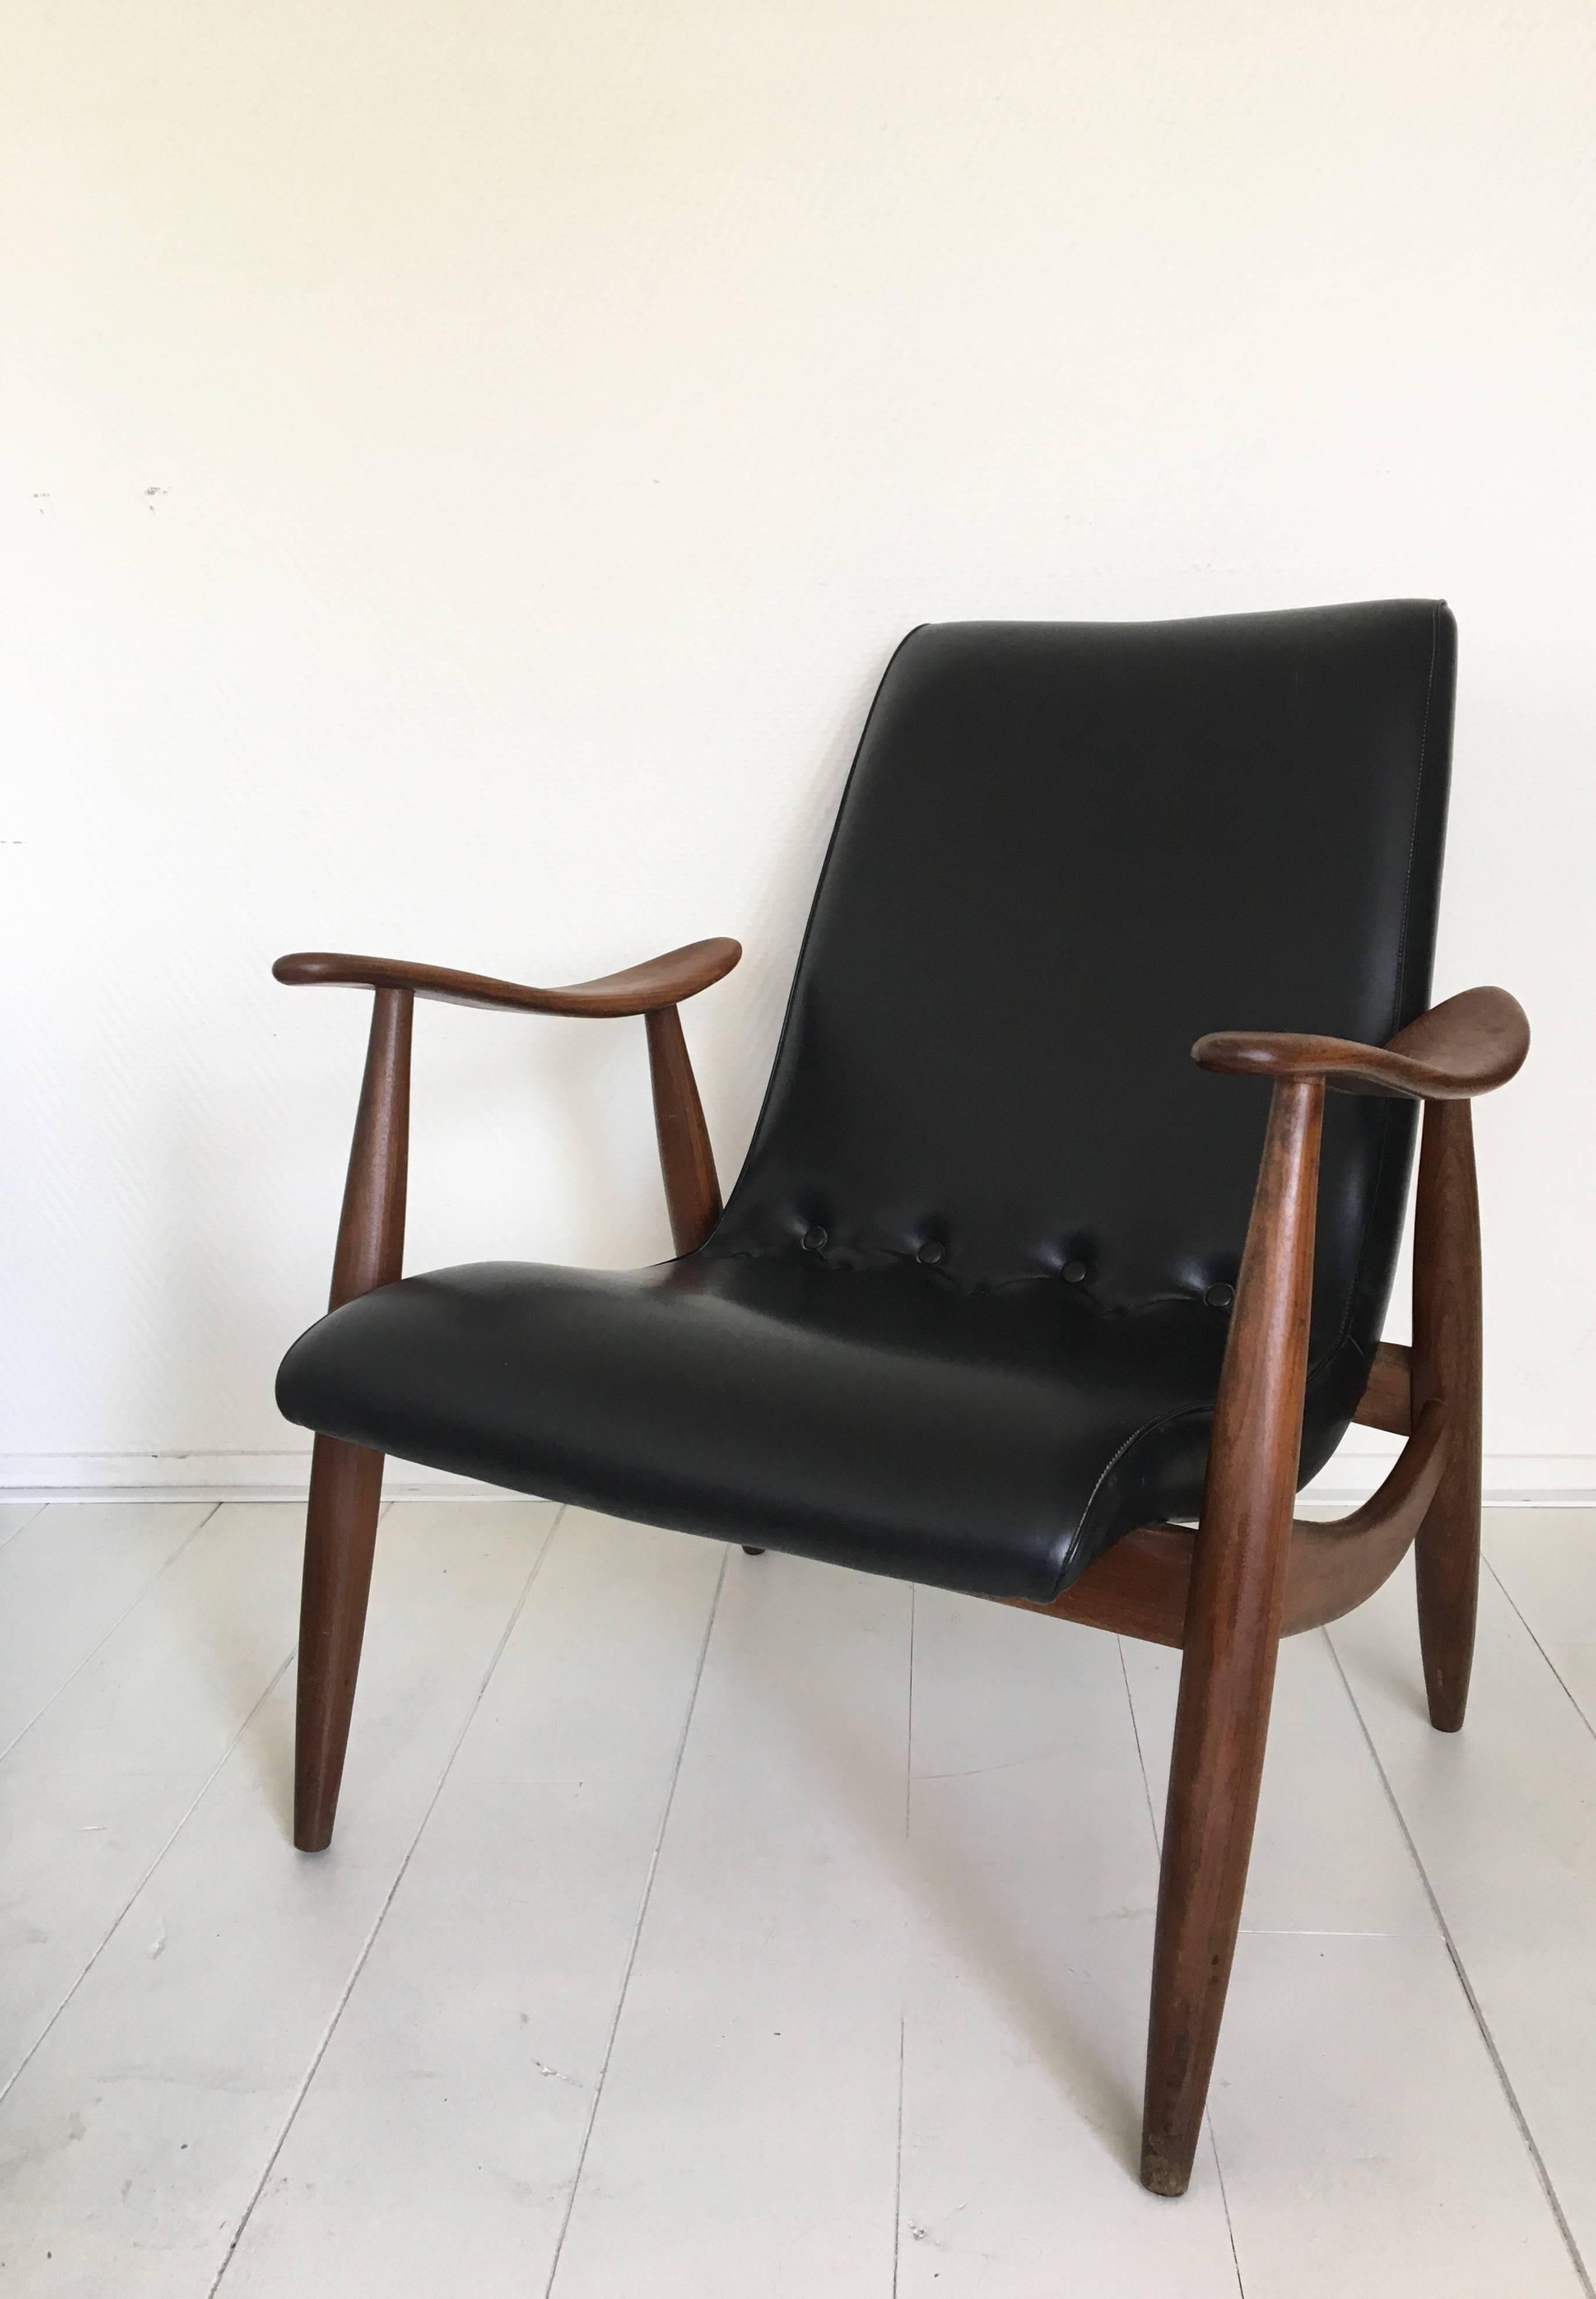 This gorgeous Dutch design features a teak frame with a black Leatherette upholstery. The chair remains in wonderful condition with some signs of age and use (scratches to the Leatherette and some light wear to it's teak frame).
 